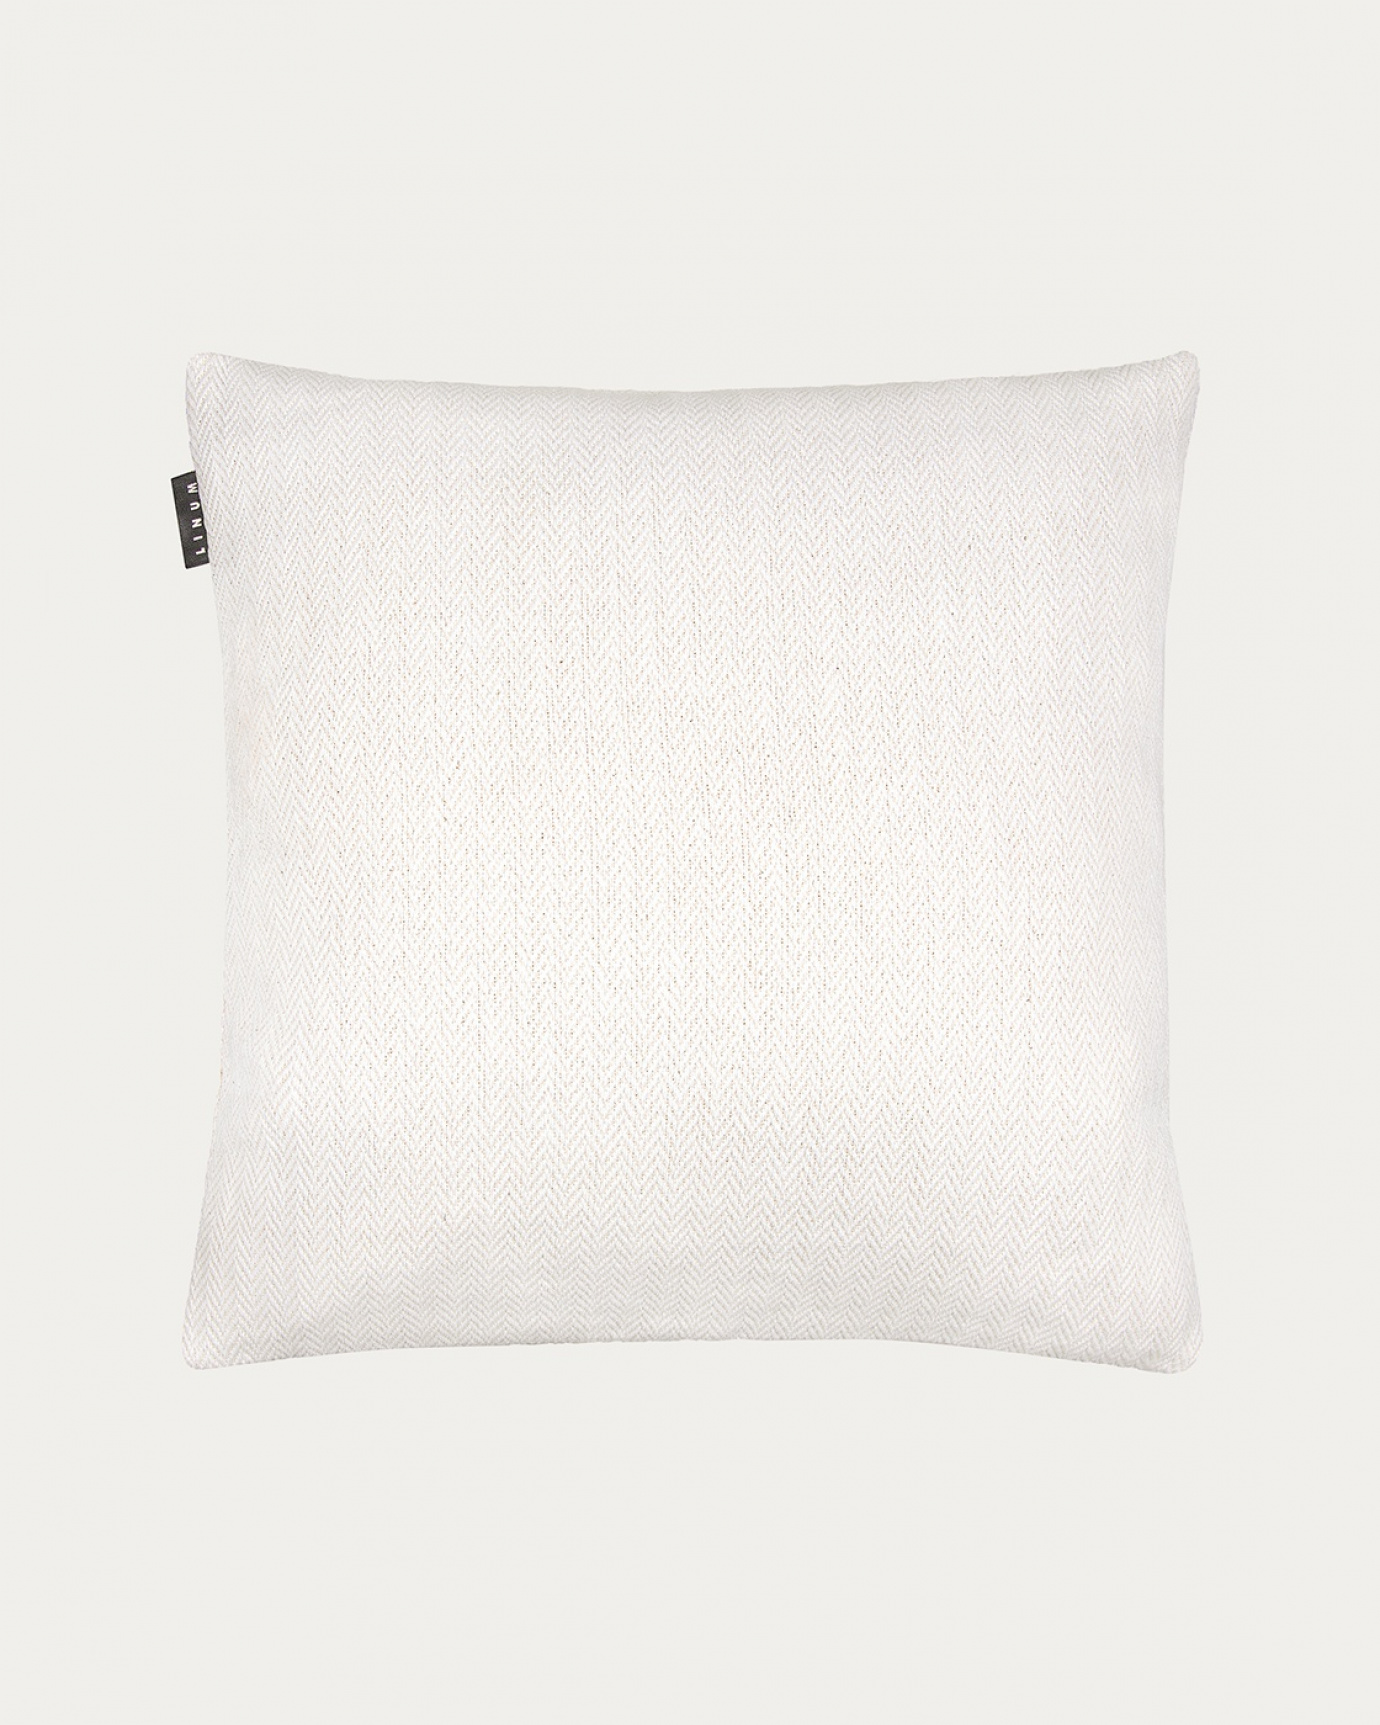 Product image white SHEPARD cushion cover made of soft cotton with a discreet herringbone pattern from LINUM DESIGN. Size 50x50 cm.